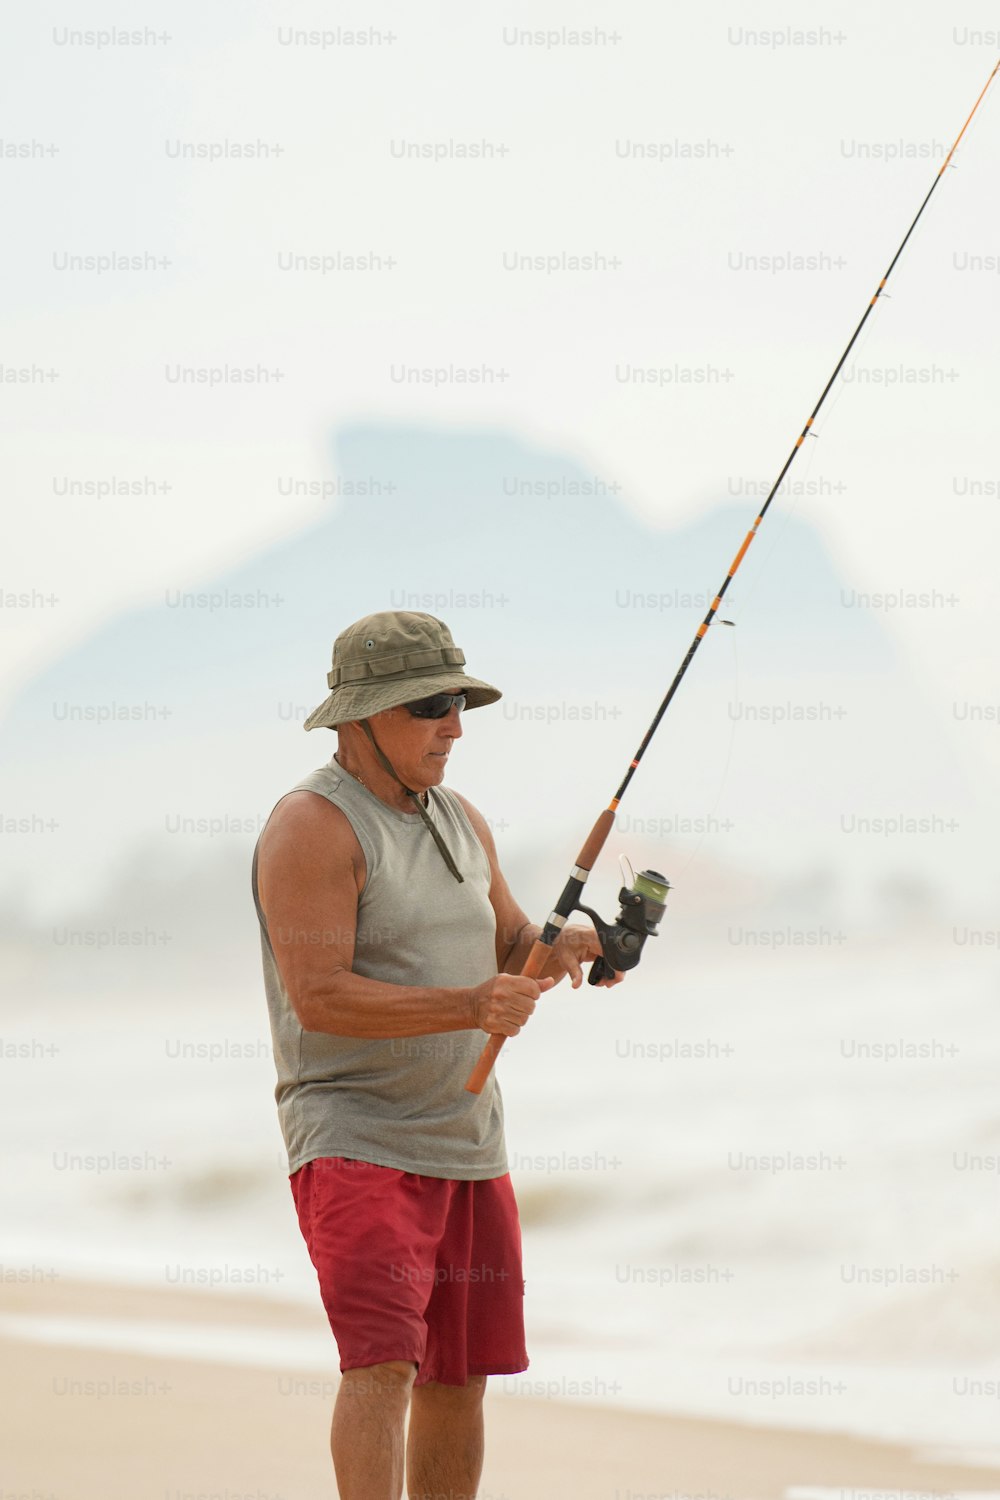 Fishing Rod Pictures [HD]  Download Free Images on Unsplash